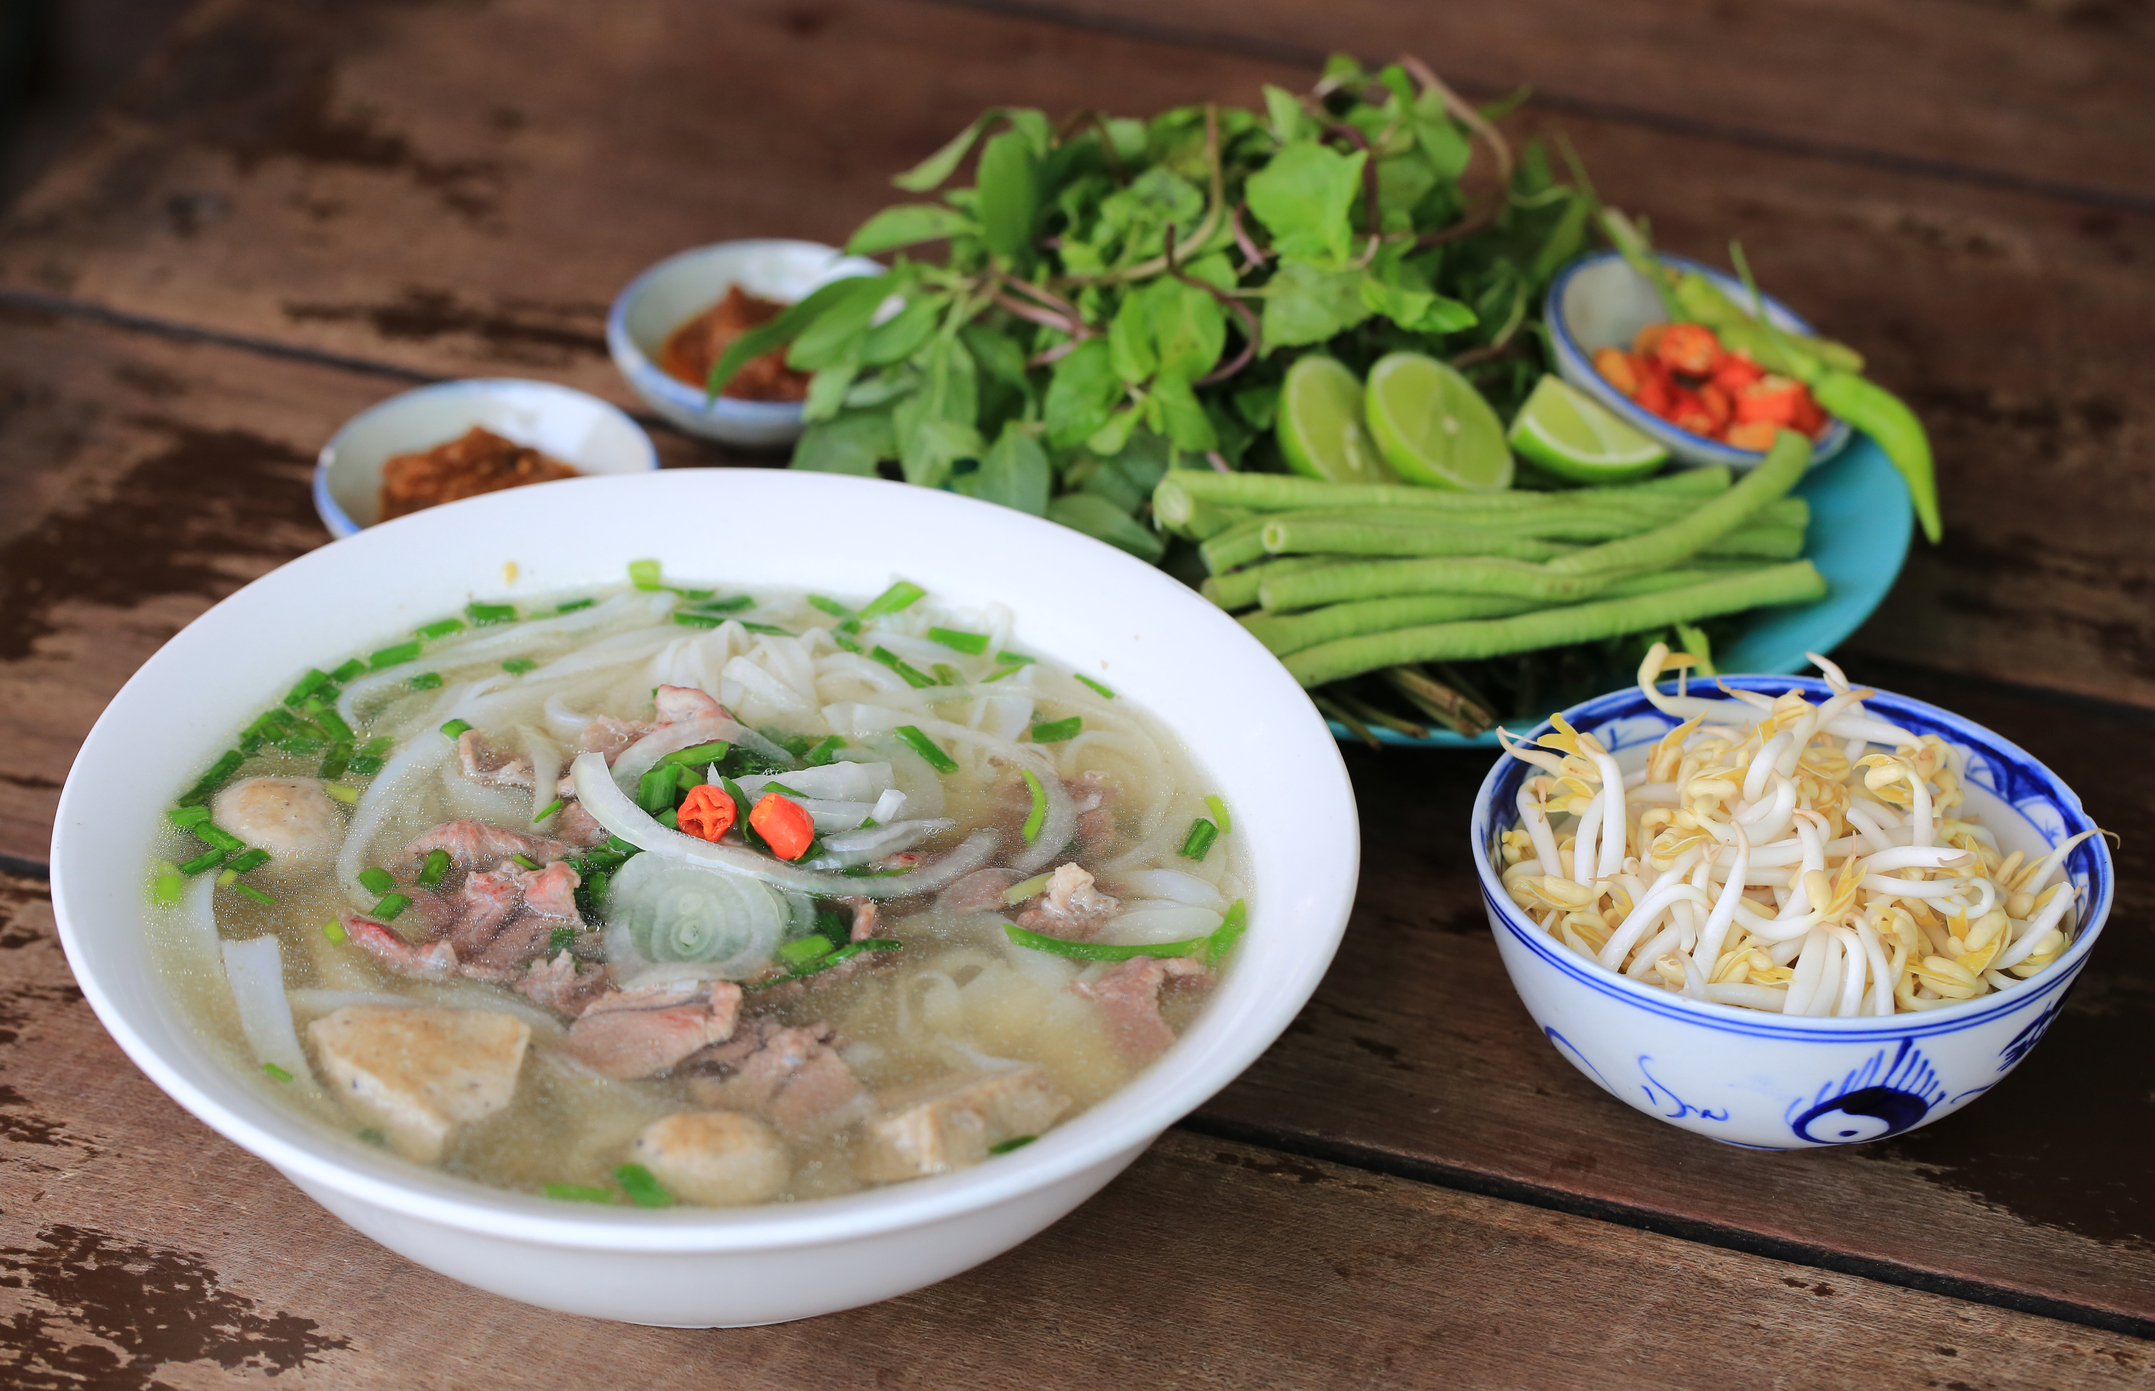 A bowl of Pho accompanied by a plate of green vegetables and a small bowl of bean sprouts